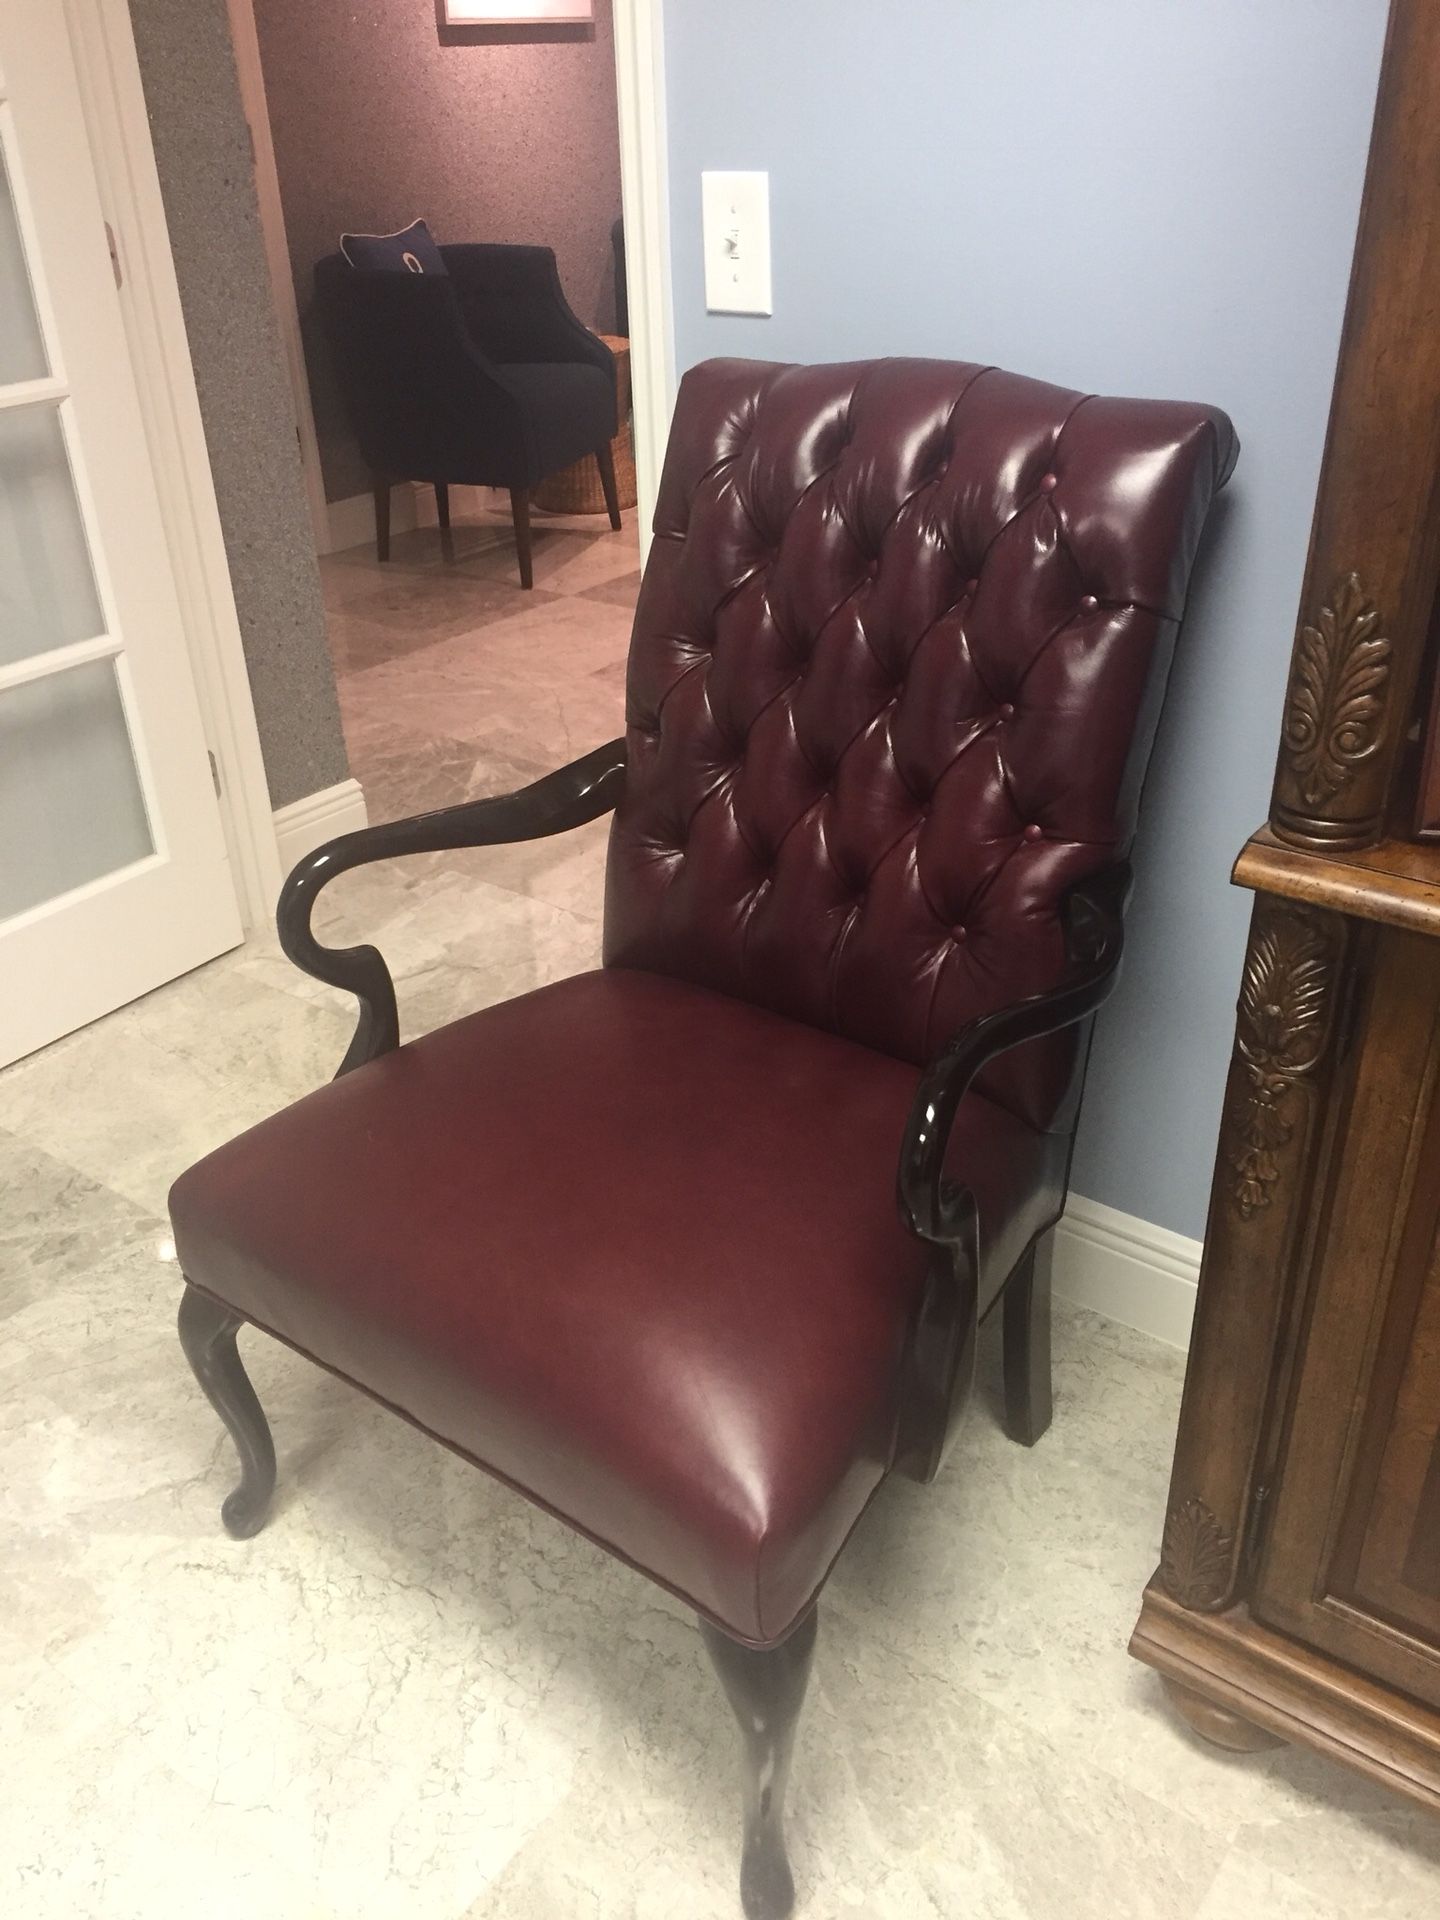 Real leather burgundy chair $50 Like new